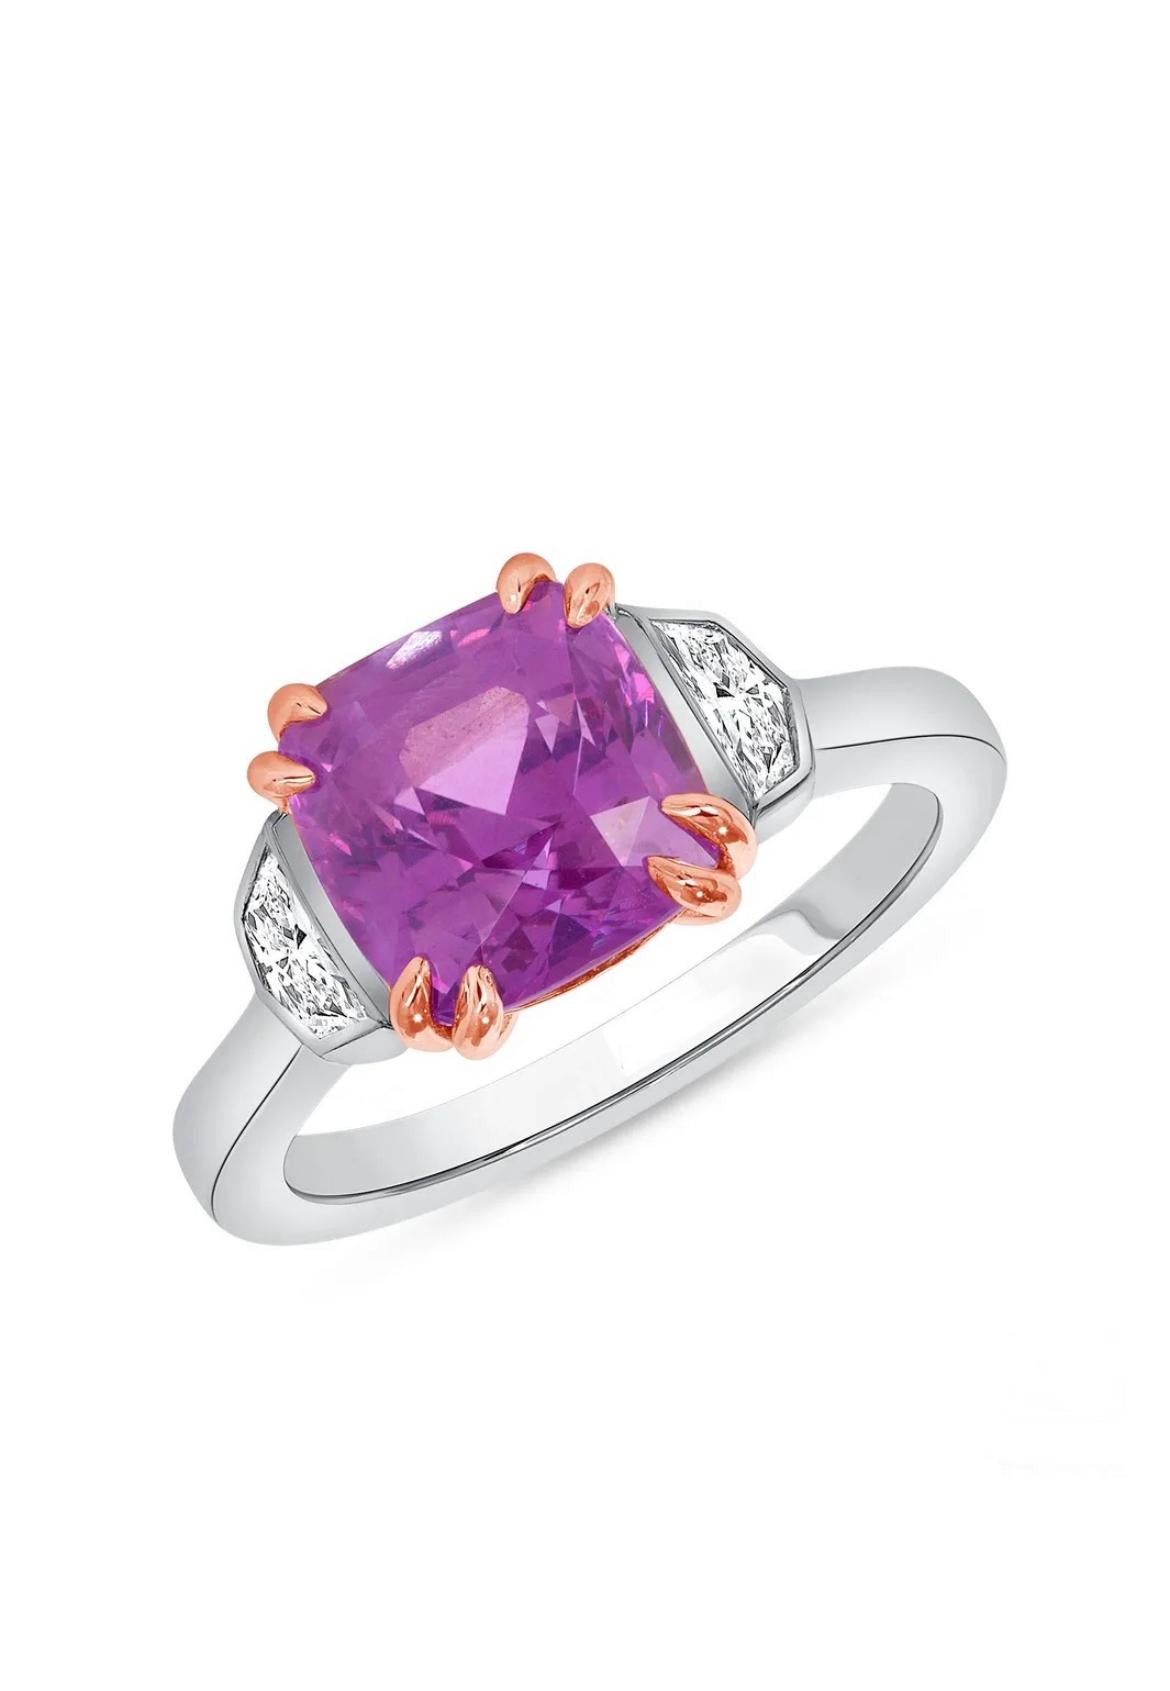 A 4.72ct, untreated Ceylon Pink Sapphire is gleaming vibrantly with a captivating luscious pink color, captured by two cadillac-cut diamonds totaling 0.34ct, the stunning jewel makes a gorgeous engagement ring. Designed in 18K white with rose gold,